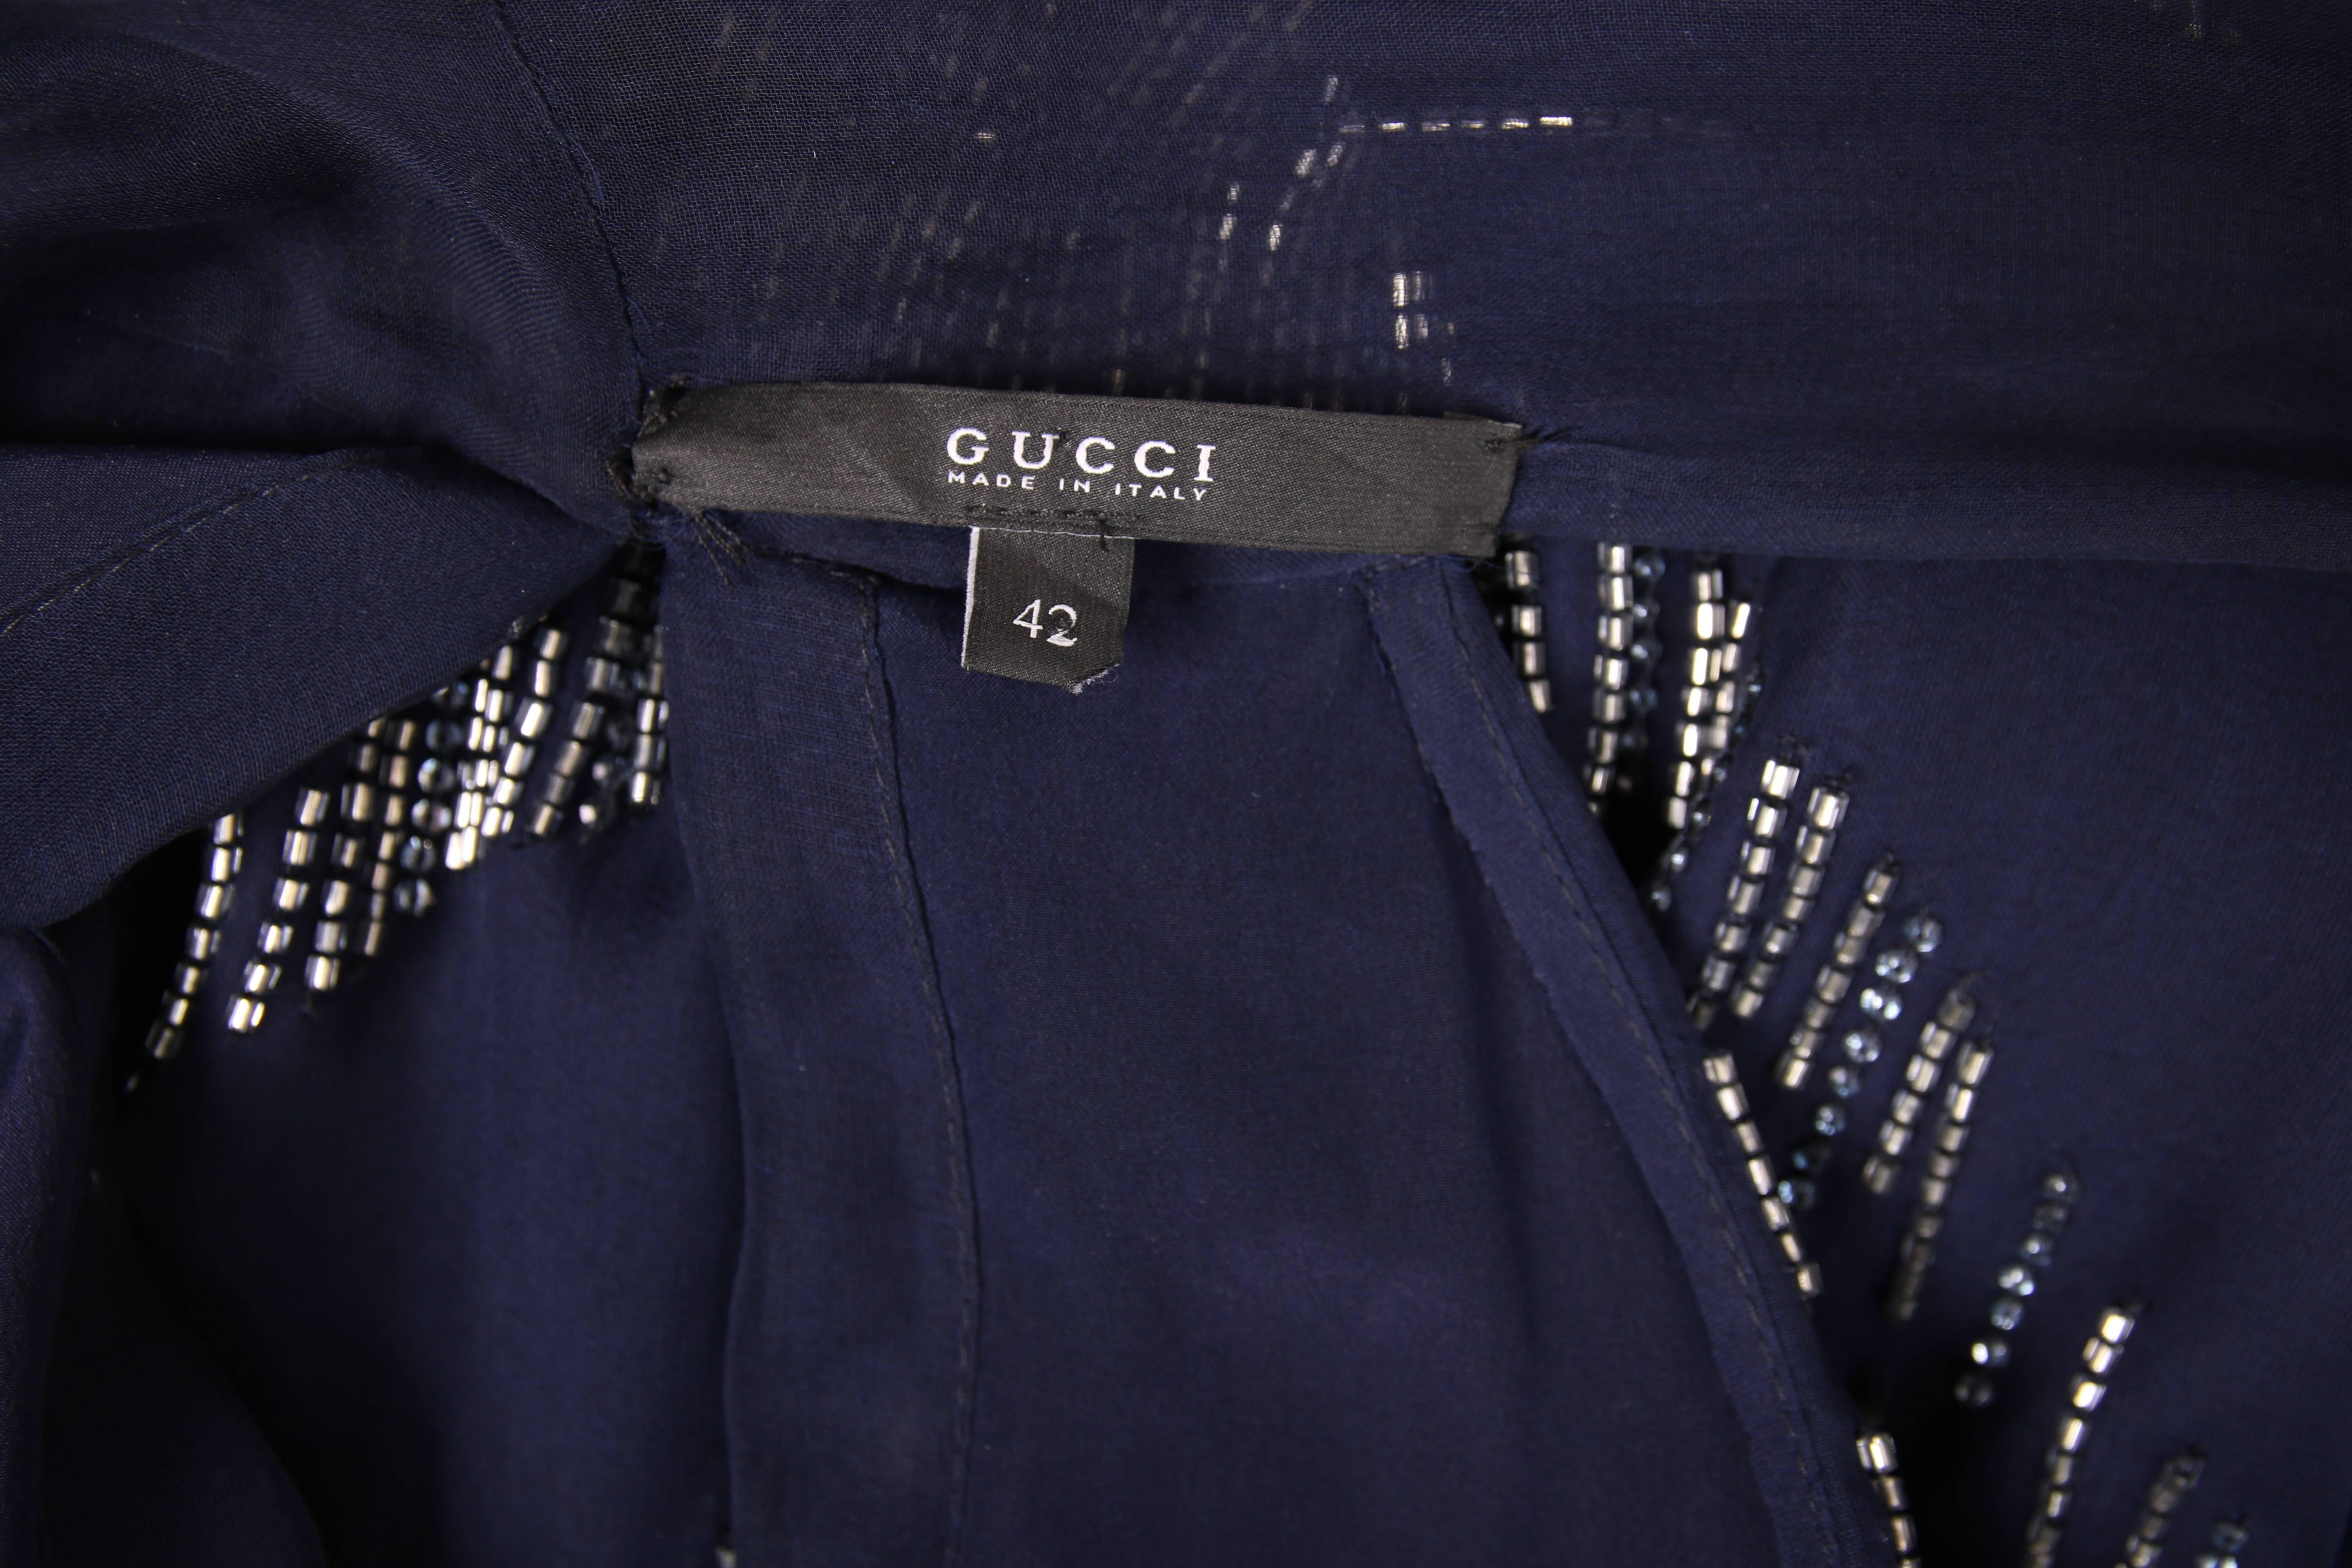 2006 Gucci Navy & Silver Beaded Cocktail Dress w/Dramatic Neck Ties In Excellent Condition For Sale In Studio City, CA